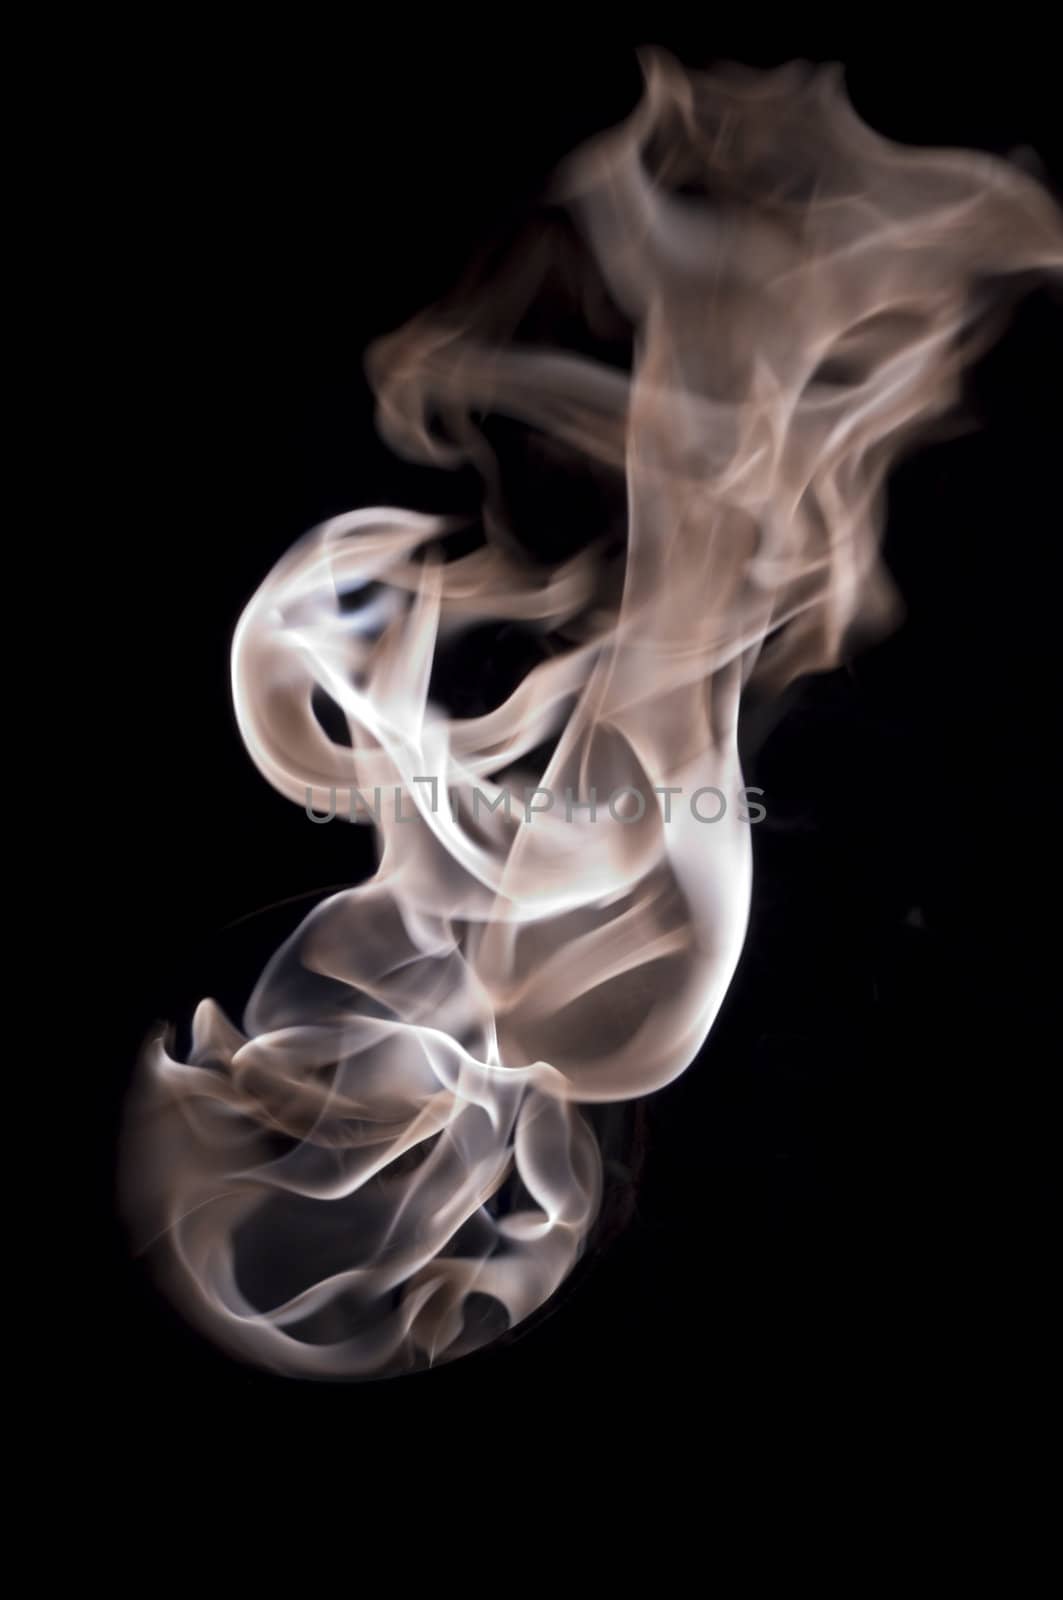 white fire with a black background, abstract background.